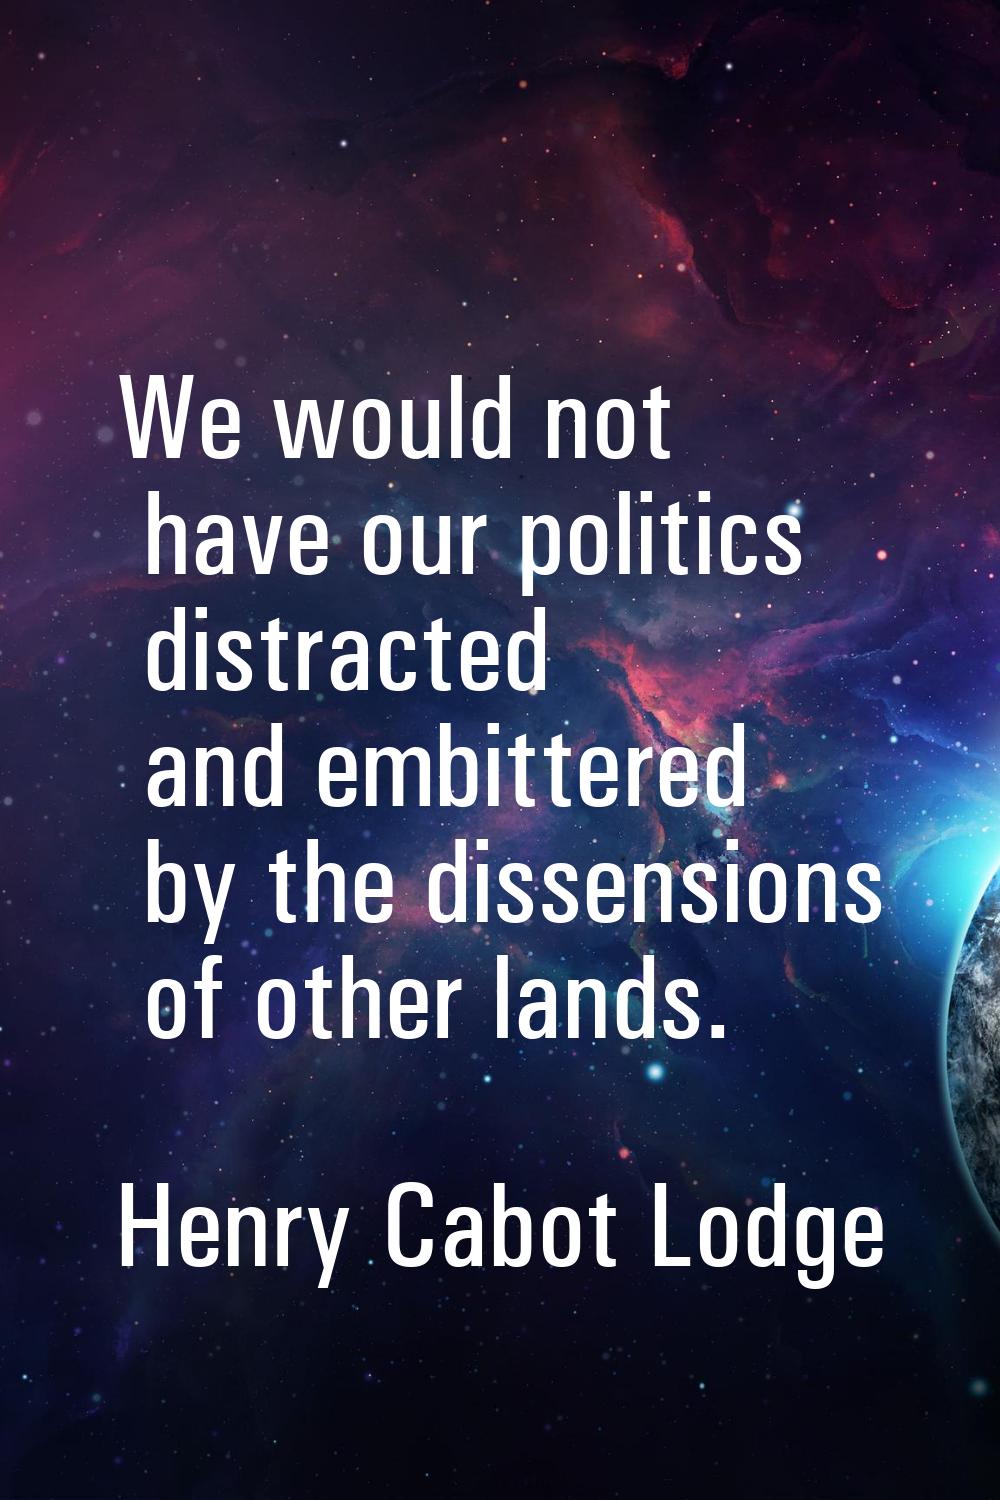 We would not have our politics distracted and embittered by the dissensions of other lands.